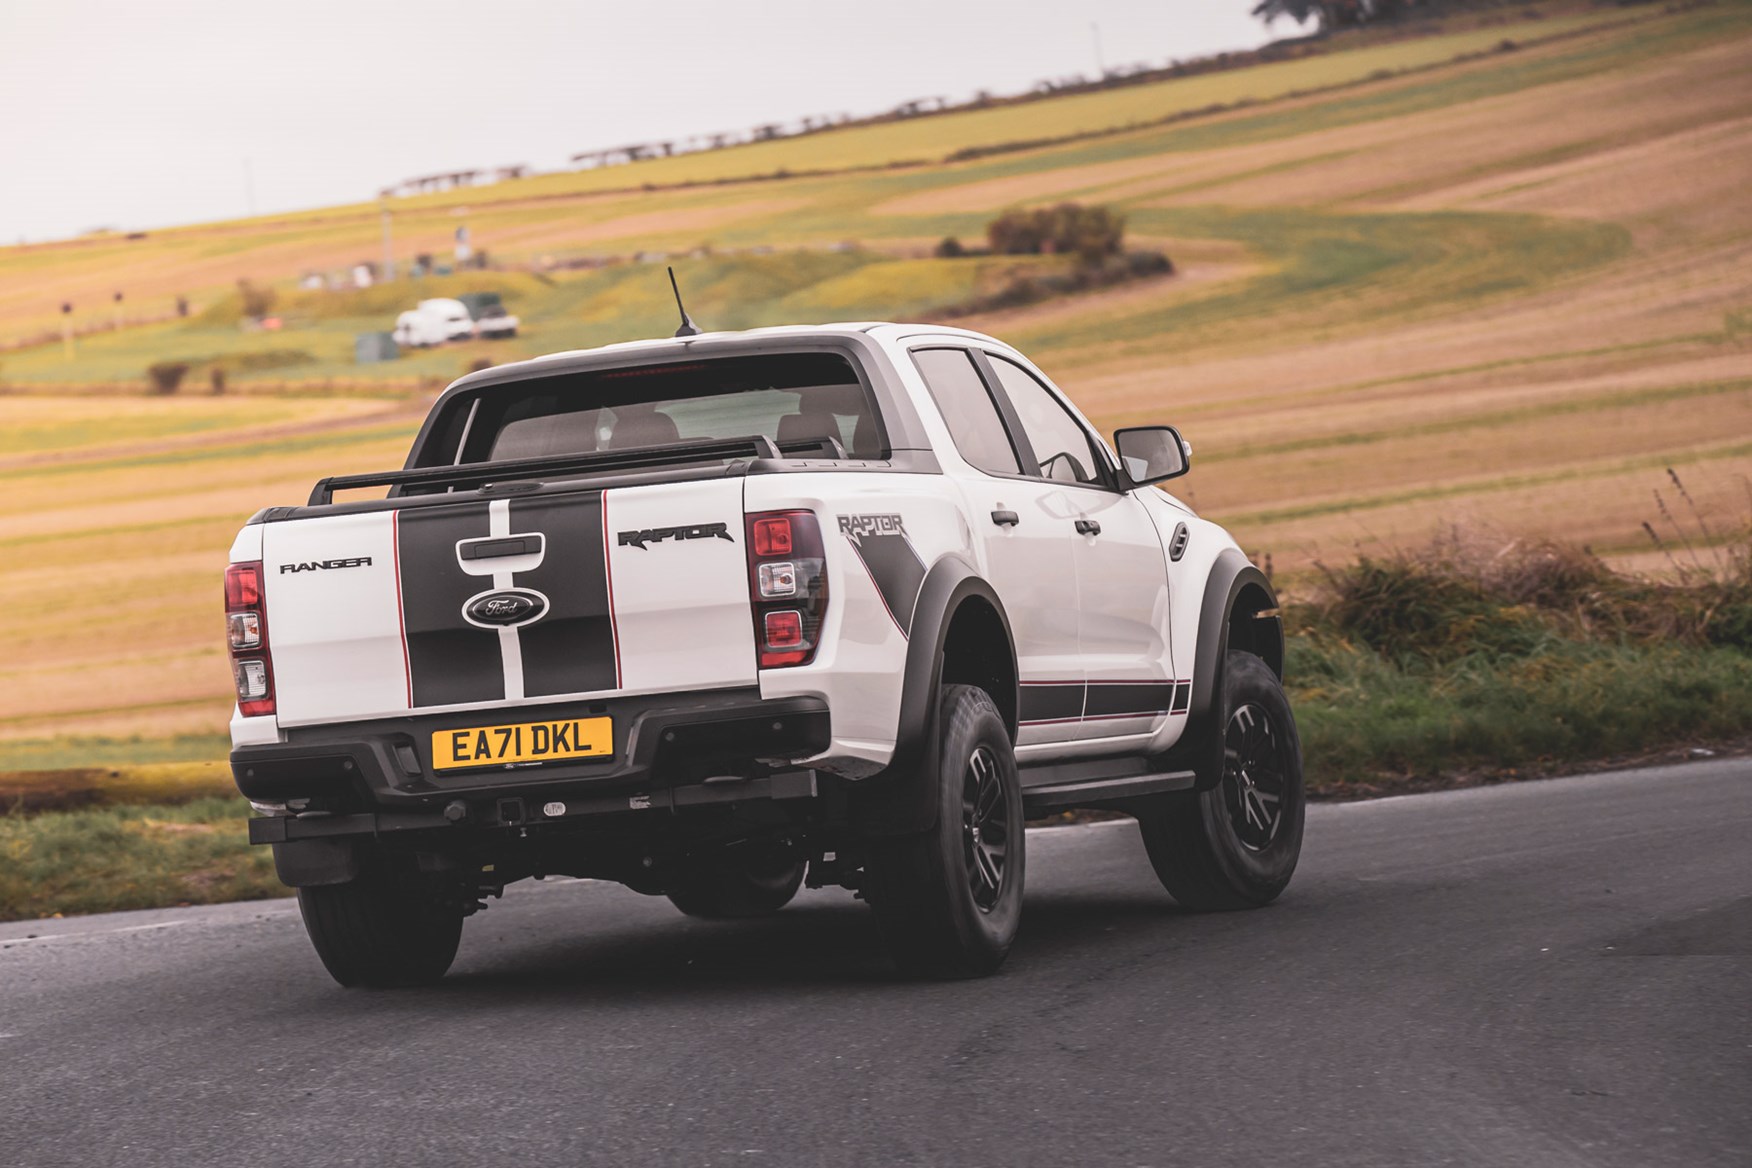 Ford Ranger Raptor review - Special Edition rear view, driving round corner